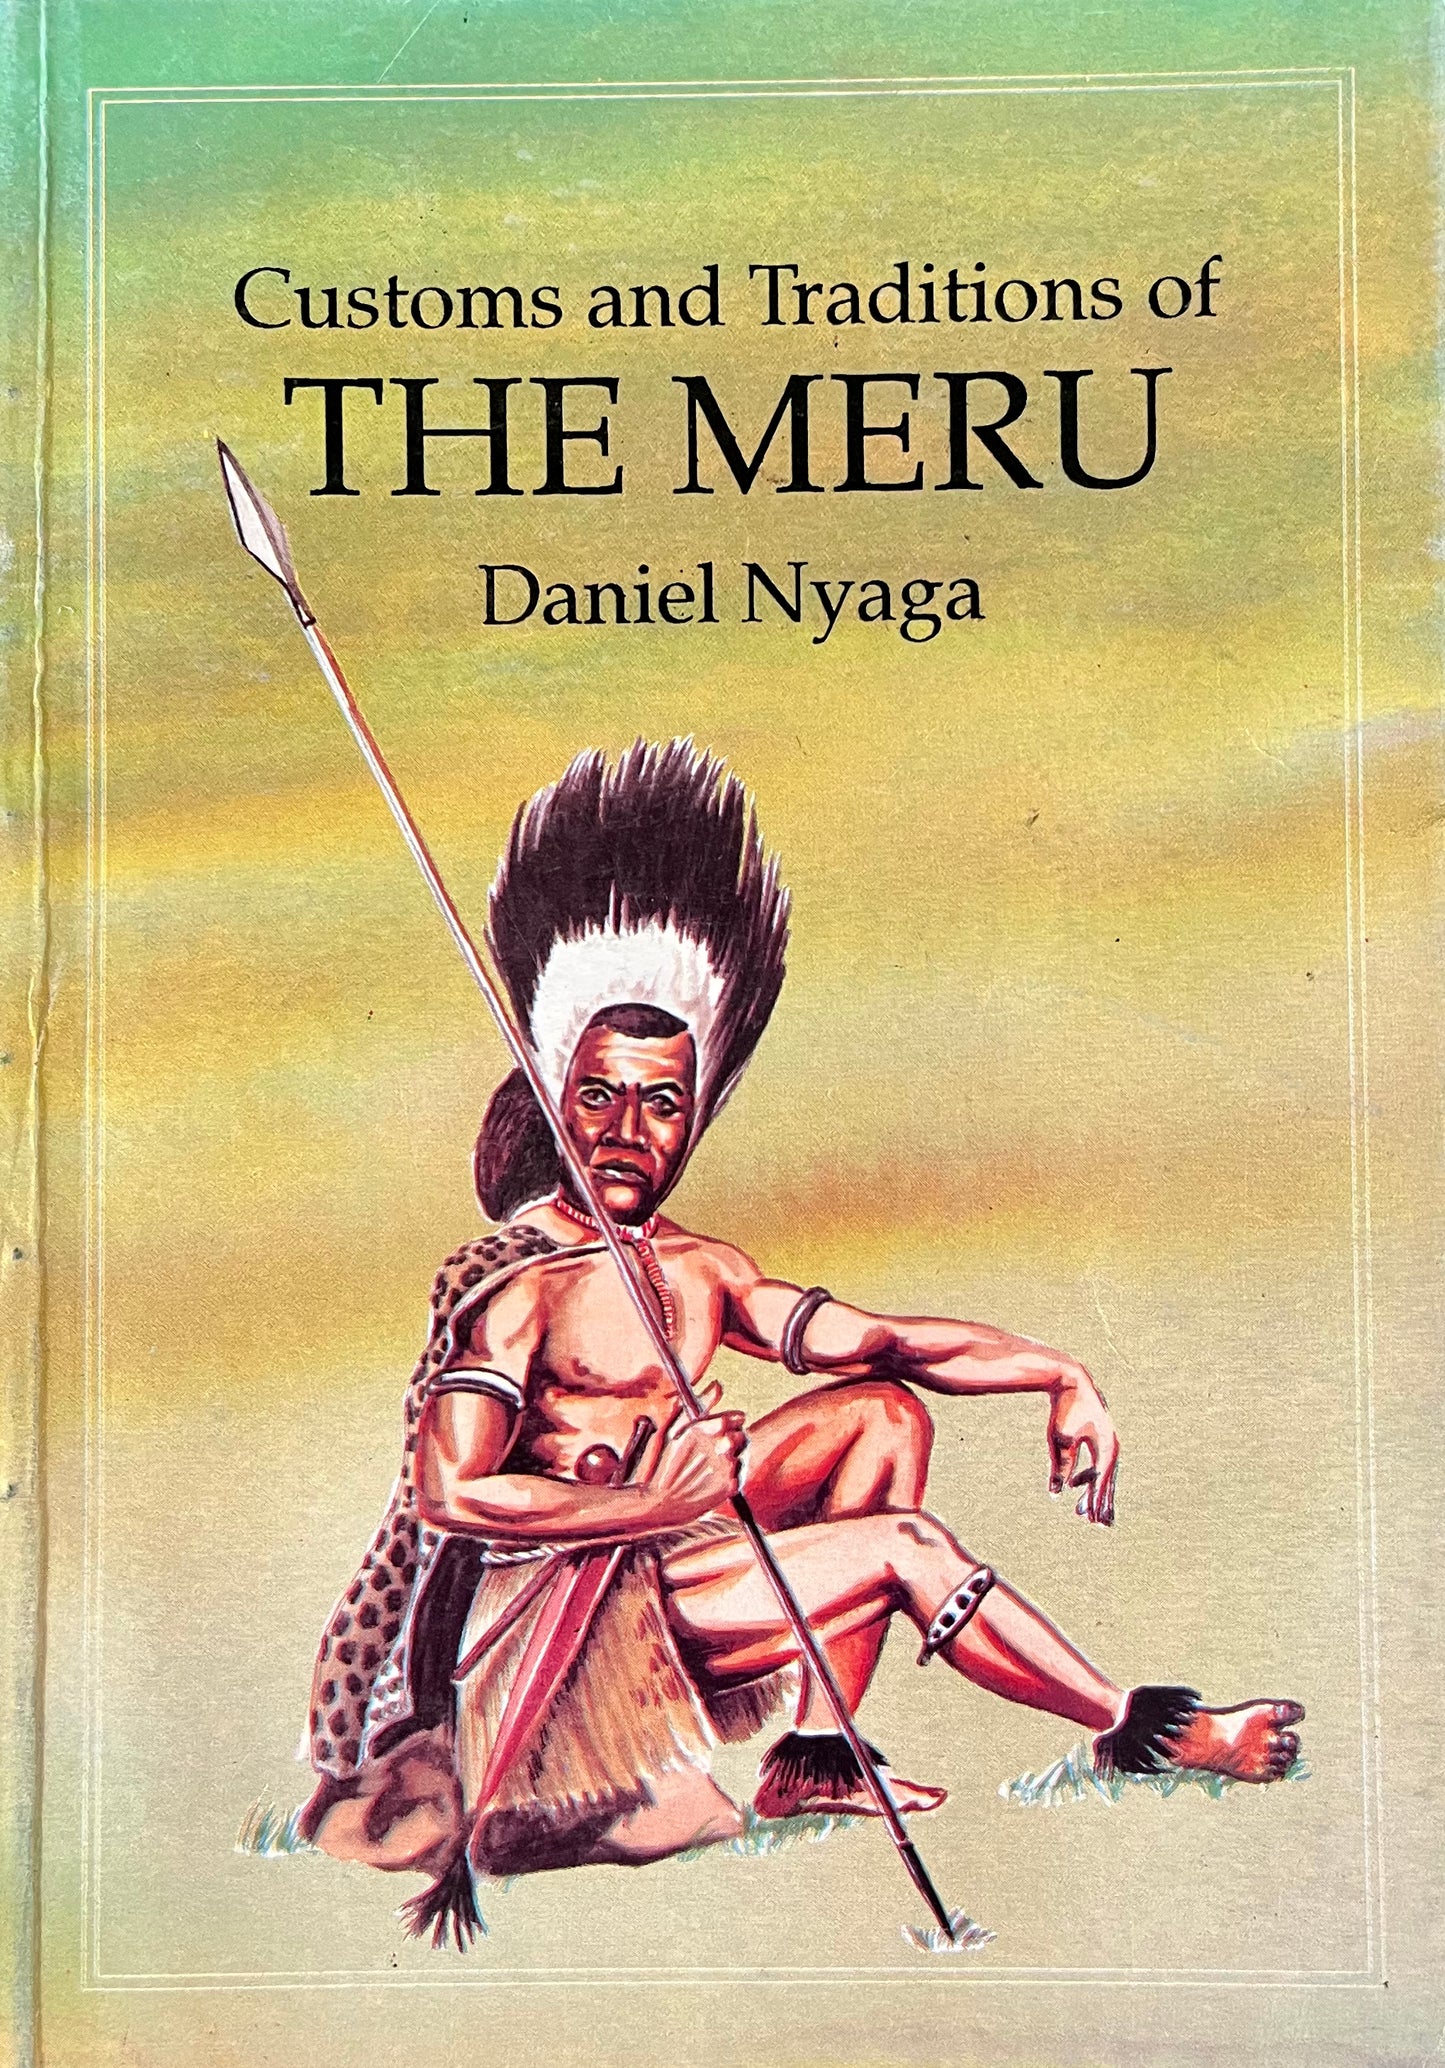 CUSTOMS AND TRADITIONS OF THE MERU by Daniel Nyaga